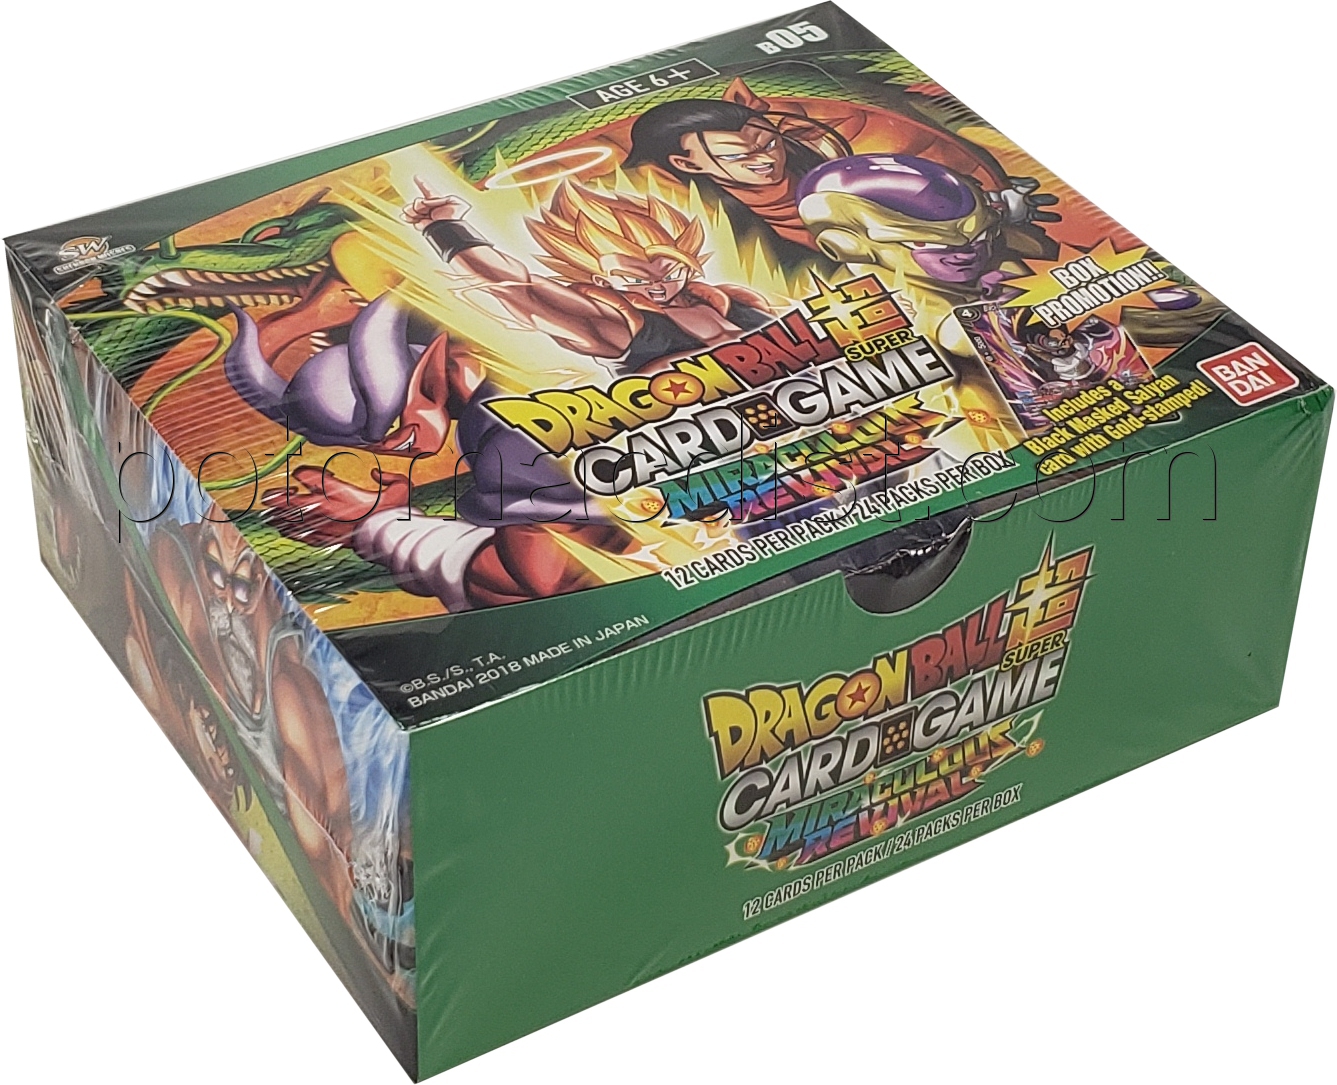 Bandai Bcldbb1121 Dragon Ball Super CG Booster Pack Miraculous Revival for sale online 